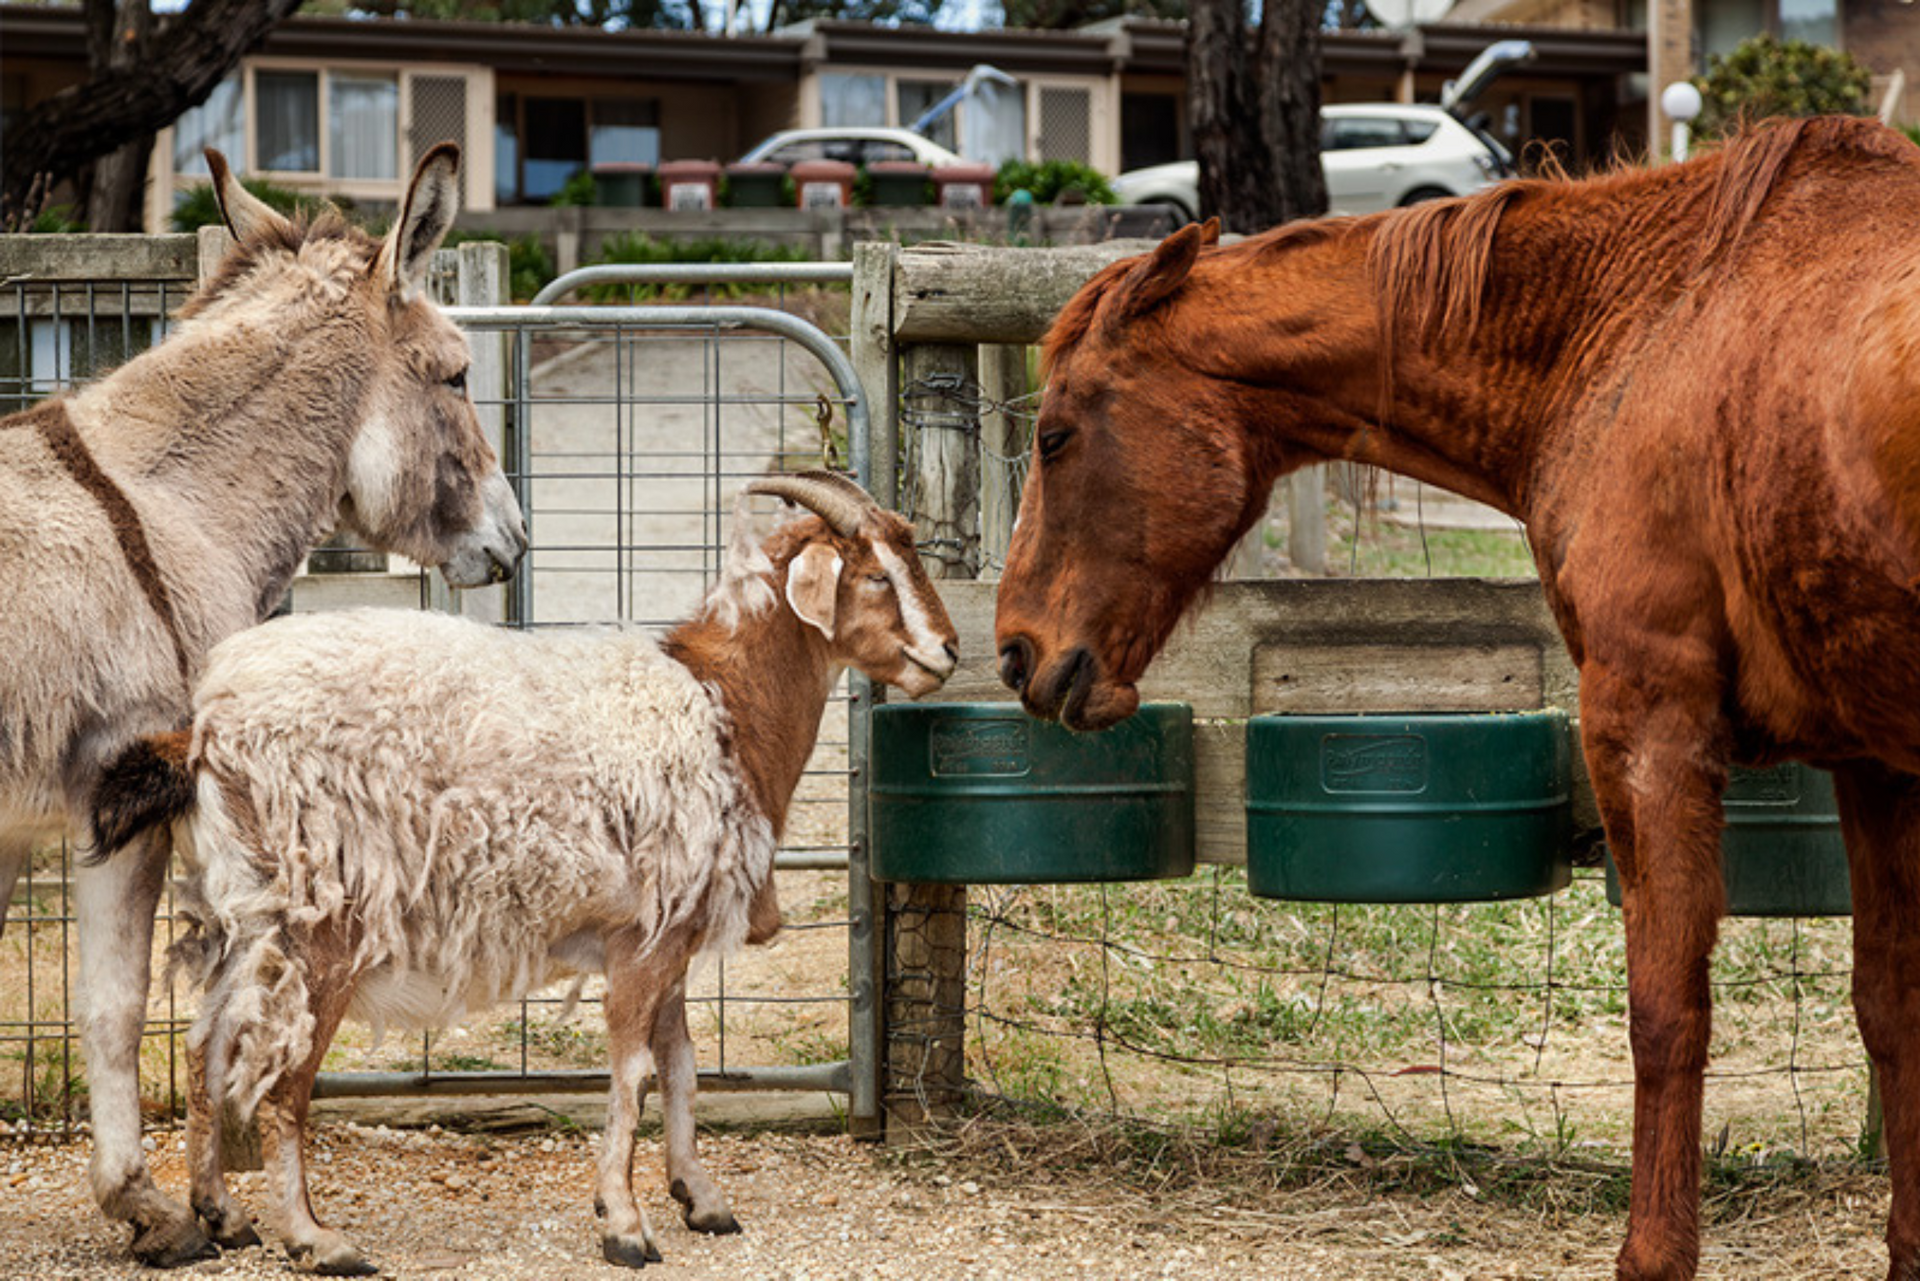 A donkey , a goat and a horse are standing next to each other in a pen.